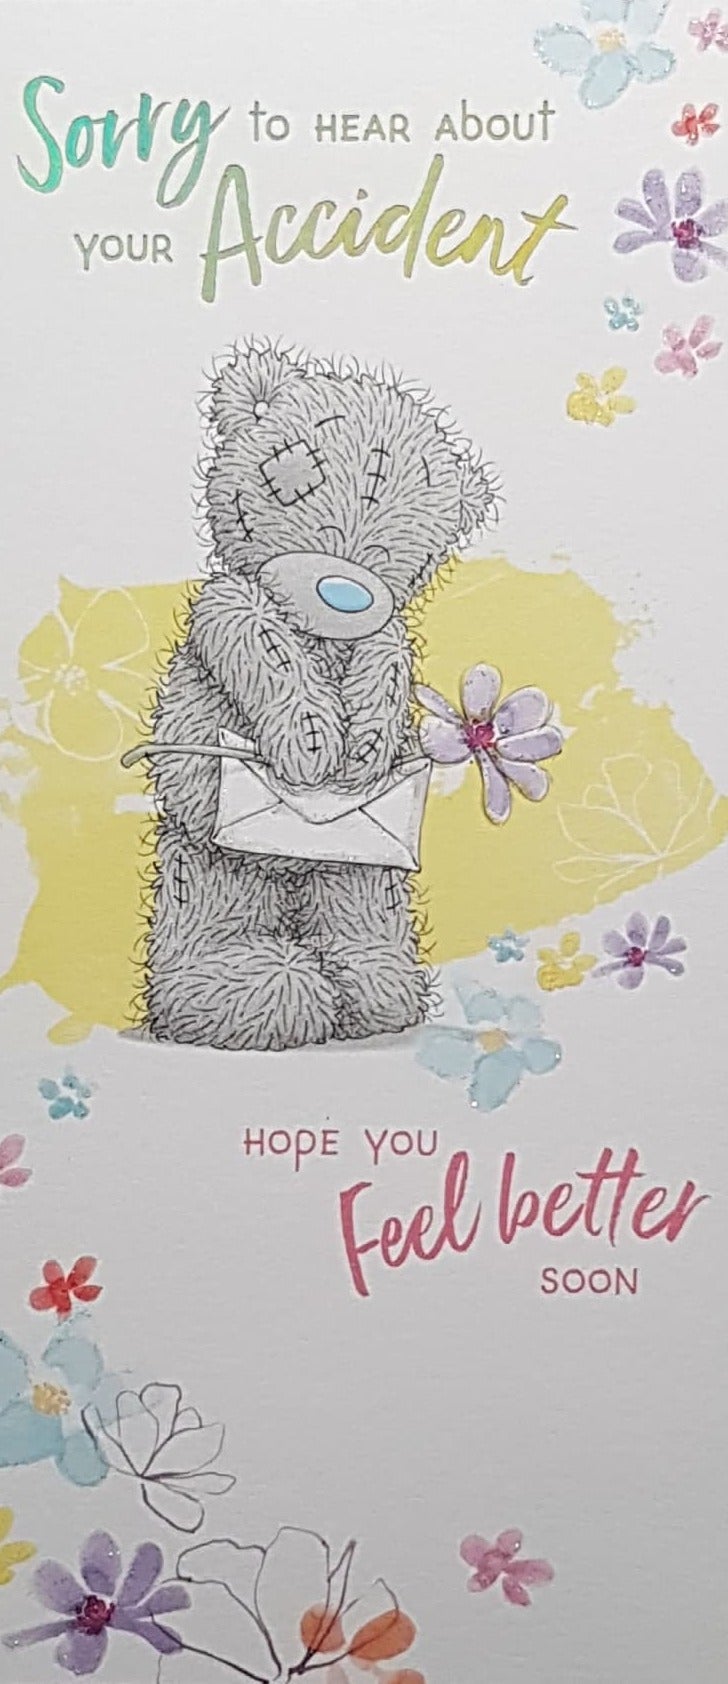 Get Well Card - Sorry To Hear About Your Accident...& Flowers